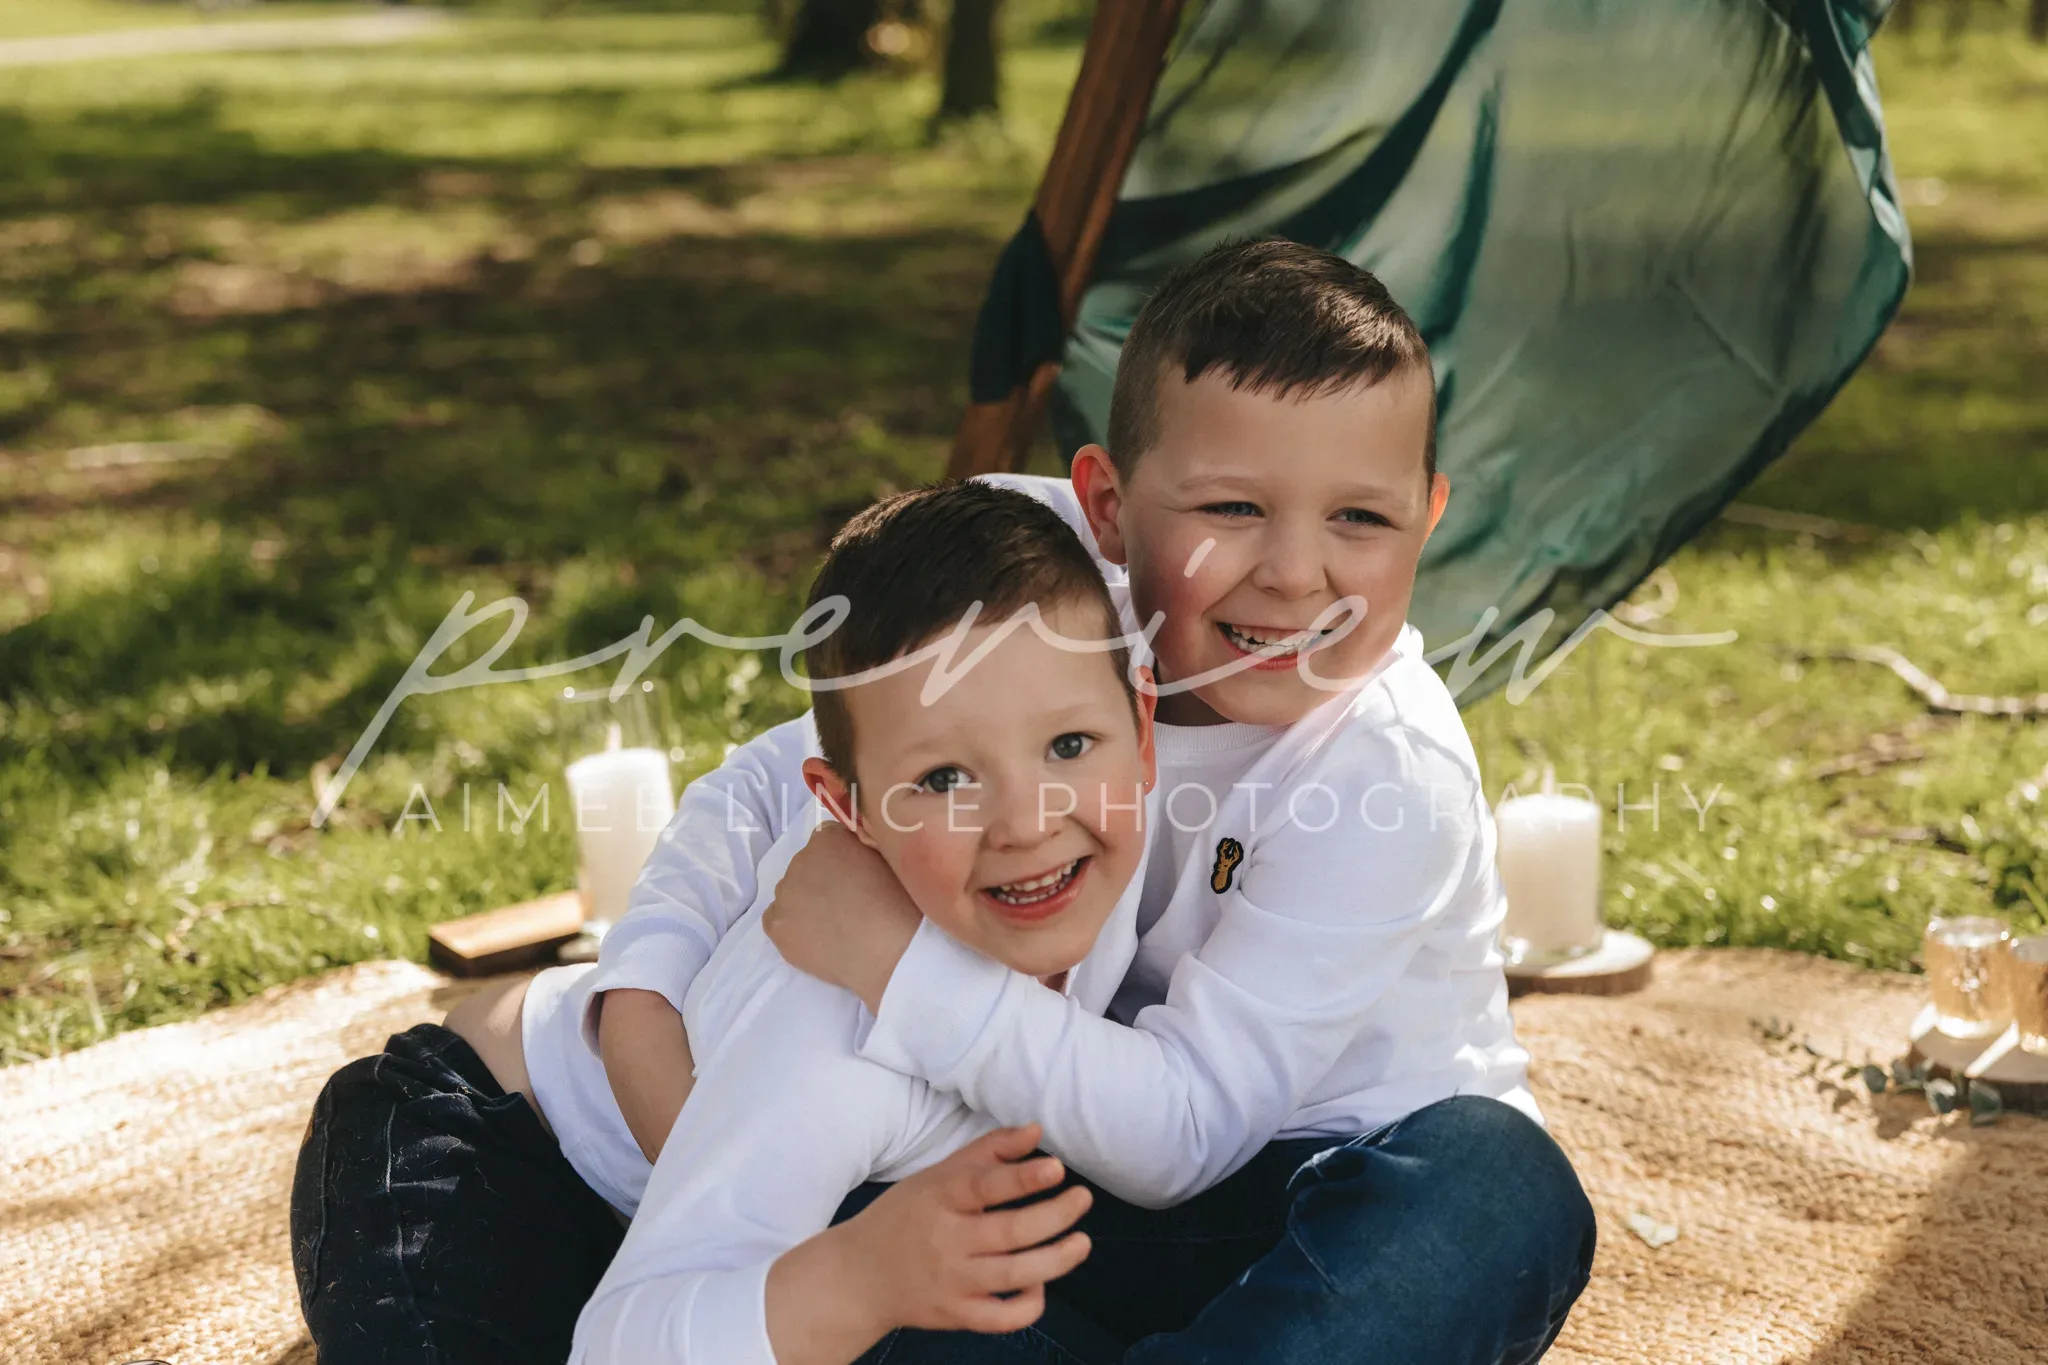 Two young boys smile joyfully as they embrace each other sitting on a blanket in a sunlit park, with a tent and trees in the background. the photo has a watermark labeled "preview, aimée lence photography".